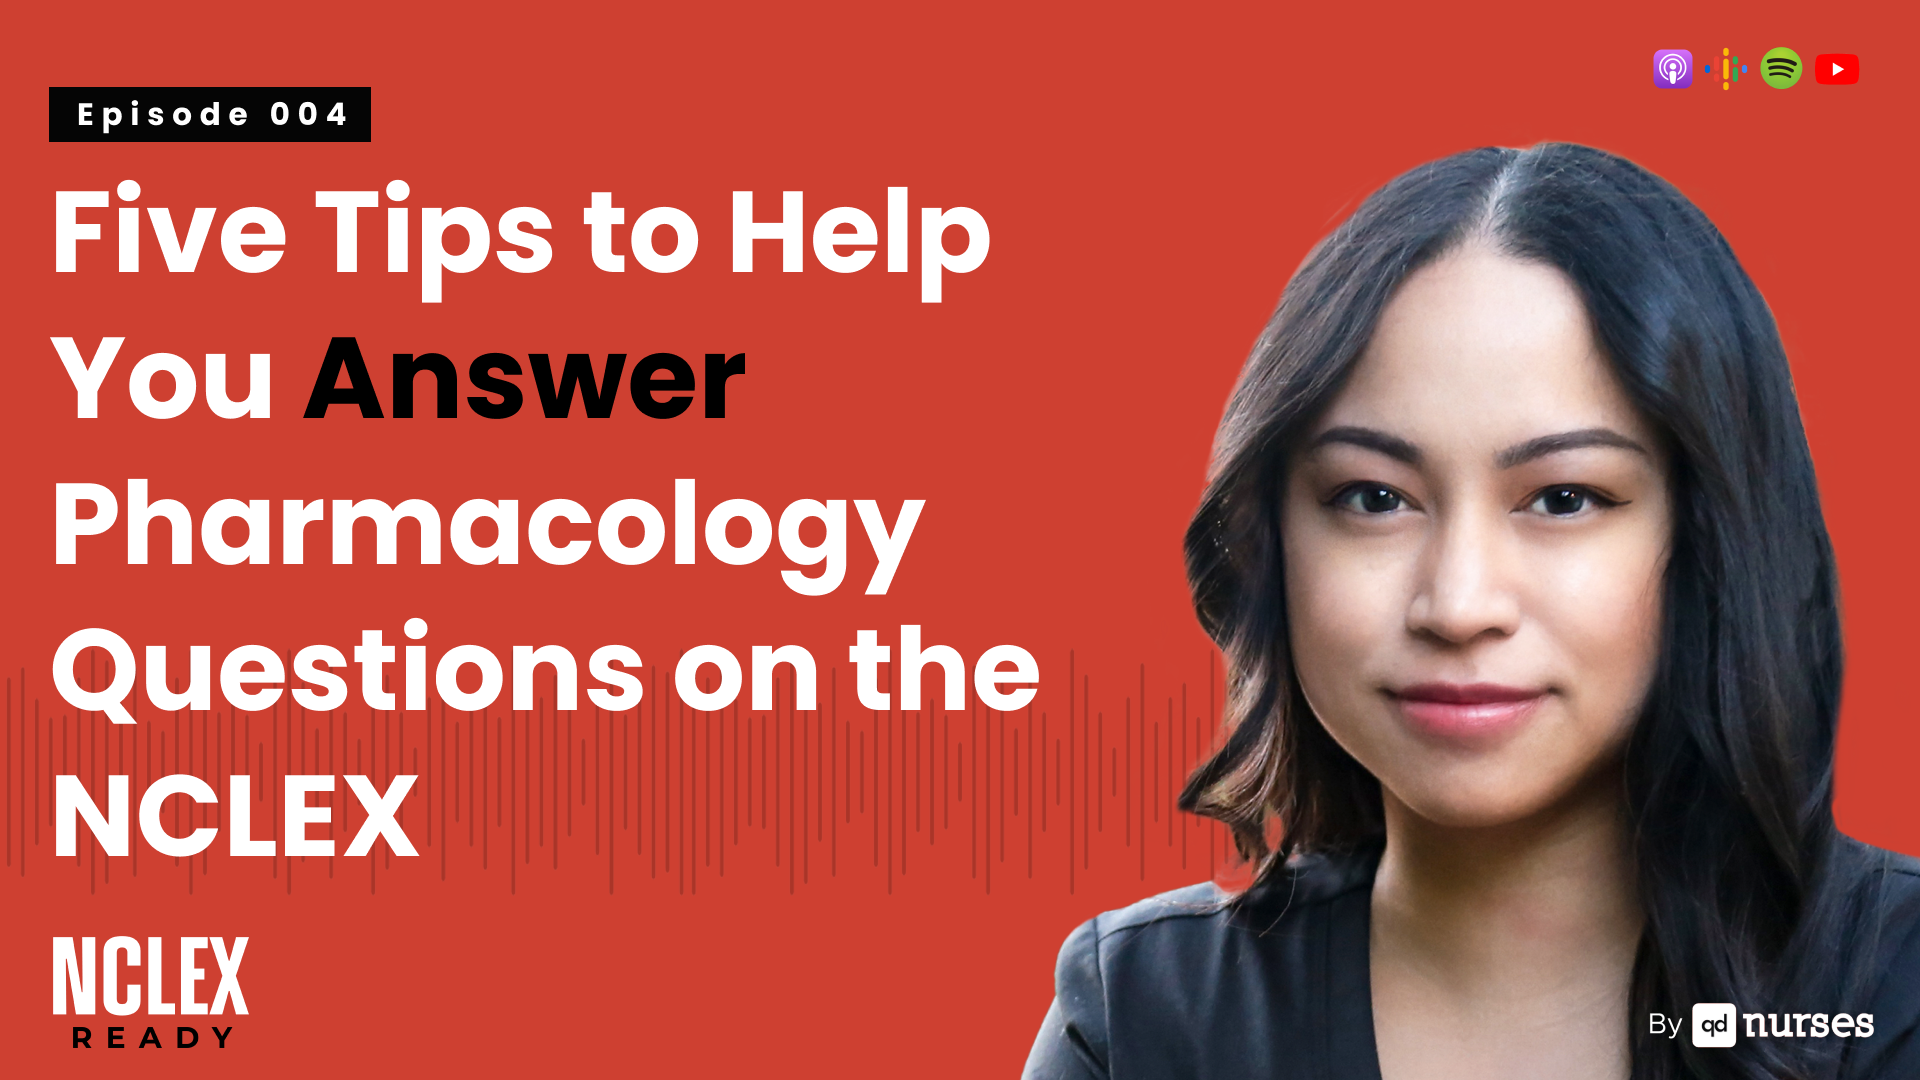 My Top Tips To Help You Answer Pharmacology Questions On The Nclex Qd Nurses